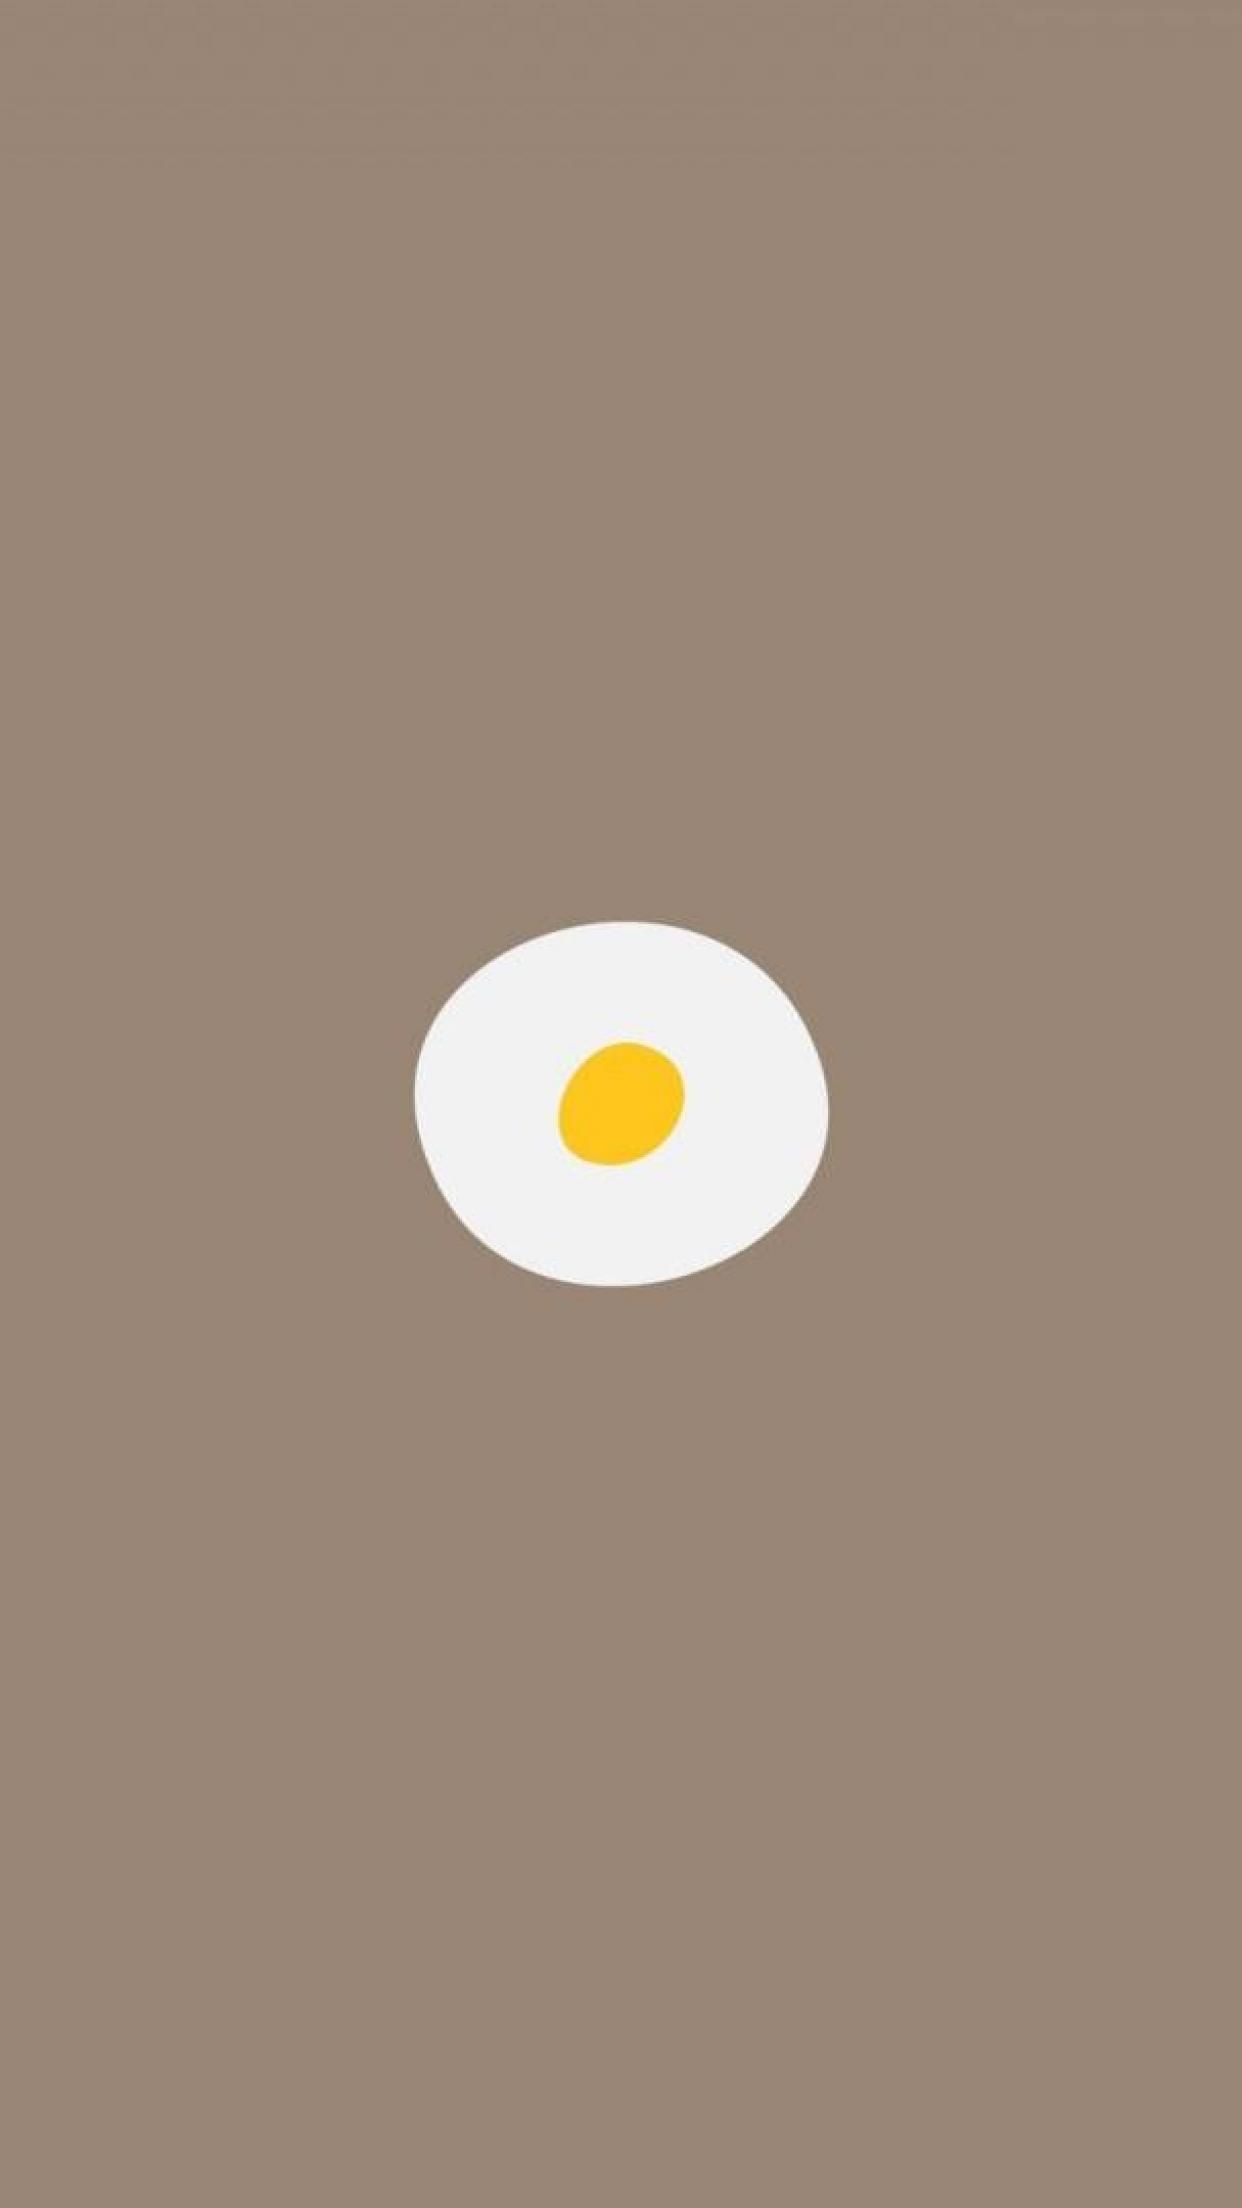 Minimalist iPhone wallpaper of a fried egg on a brown background - Egg